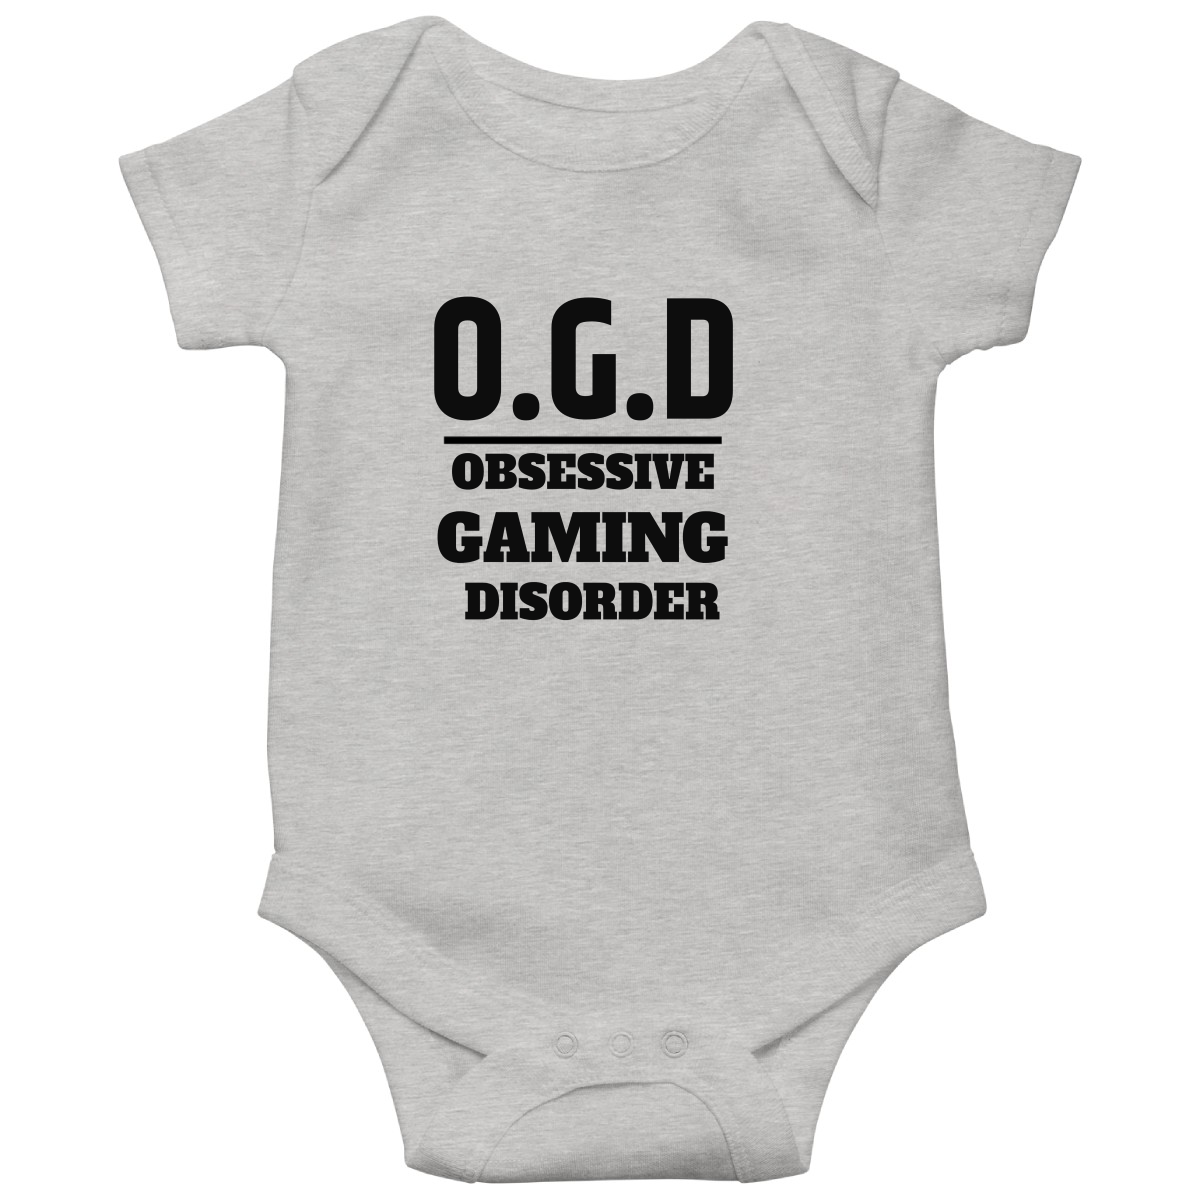 O.G.D Obsessive Gaming Disorder Baby Bodysuits